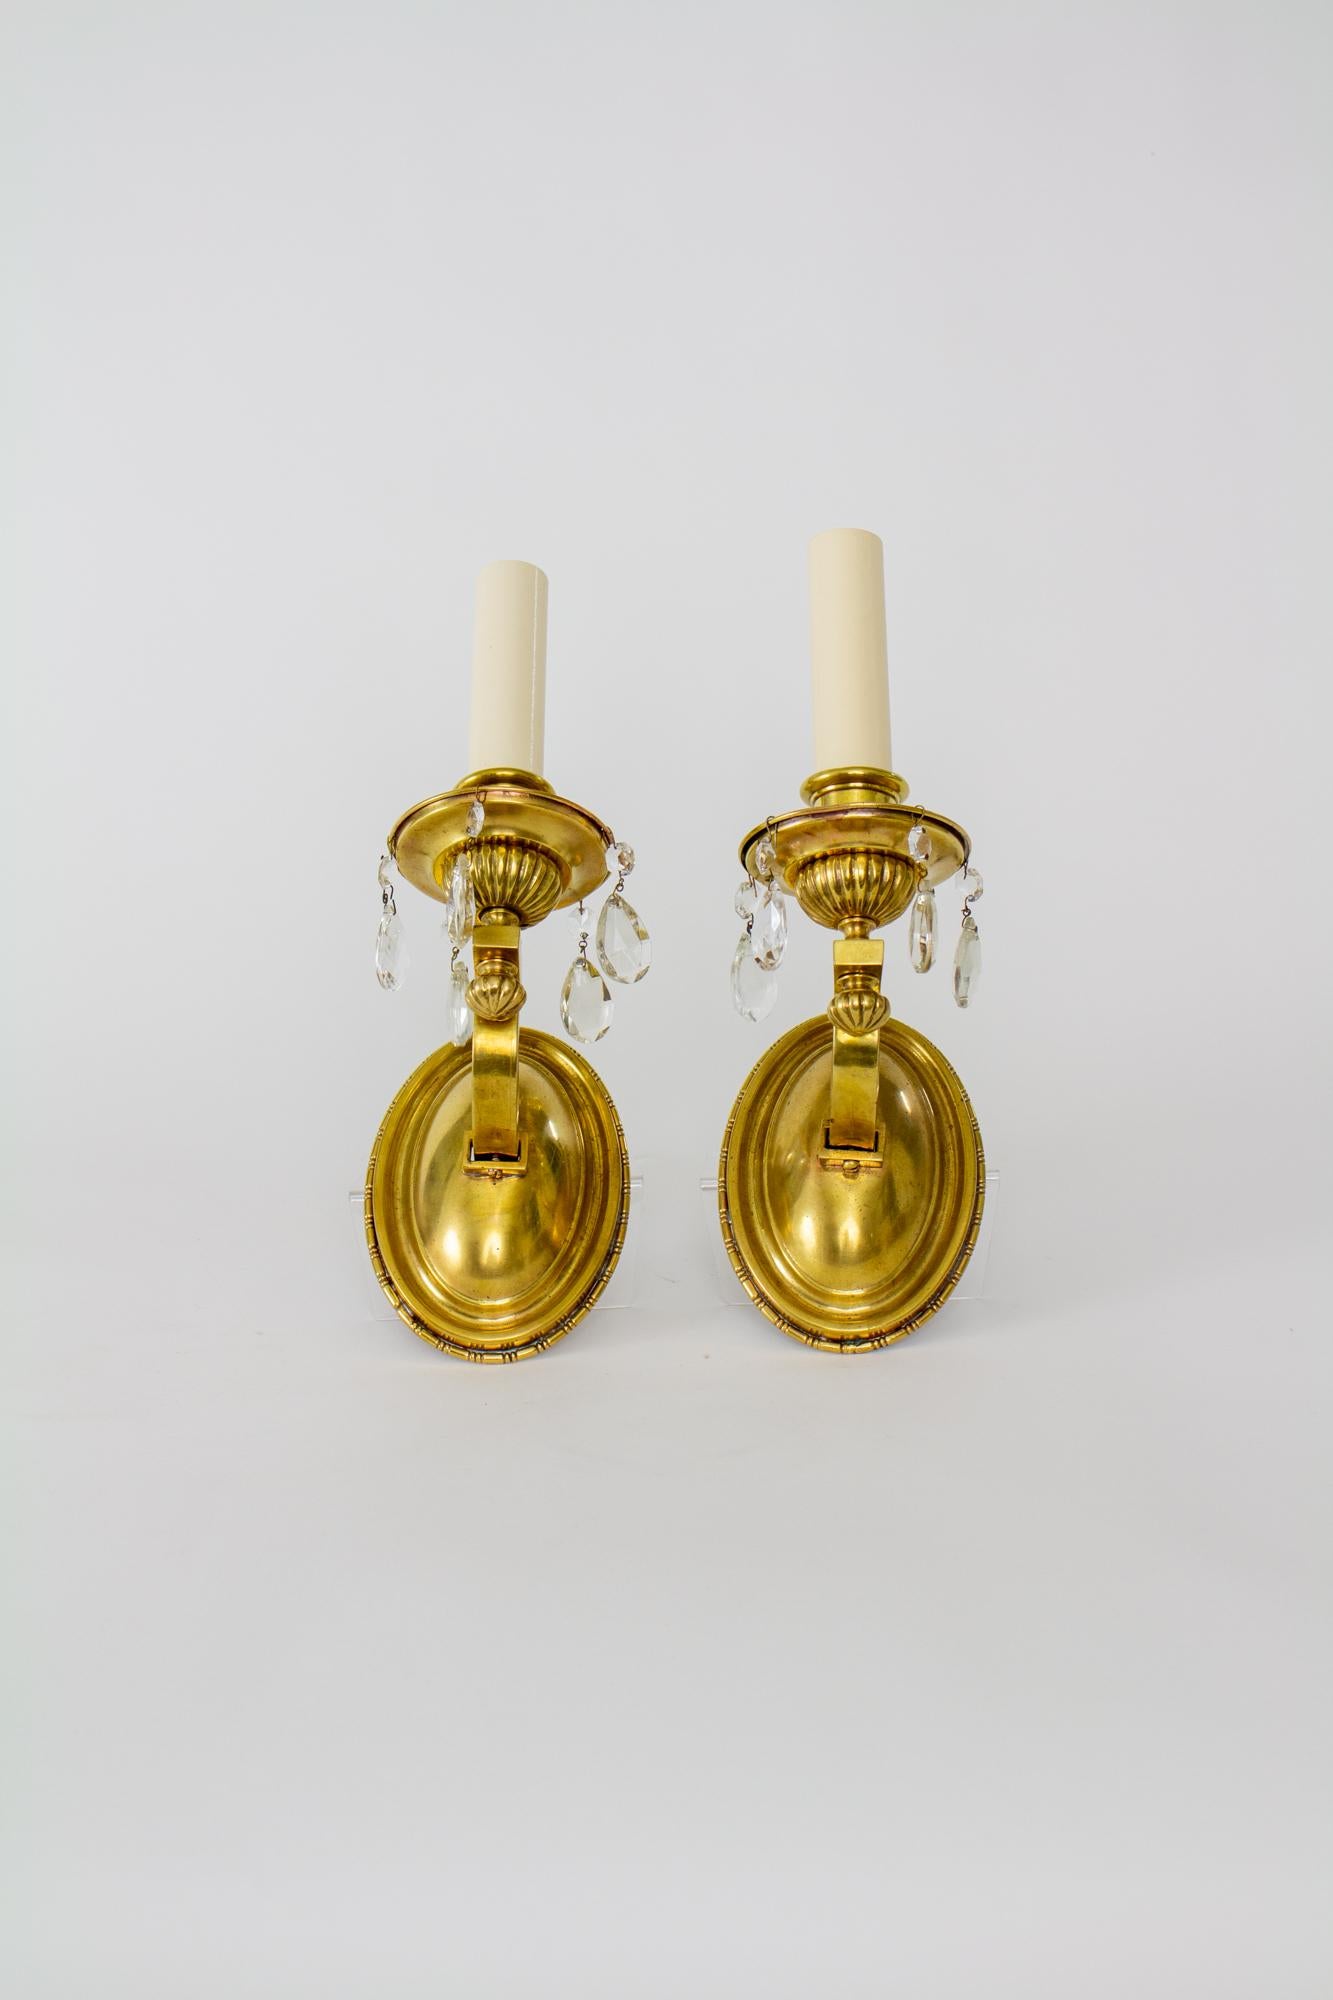 Early 20th Century brass sconces with crystals - a pair. Oval backplate with curved arms made of rectangular tubing. Ribbed decorative elements on rim of backplate, finial, and bottom of bobeche. Teardrop crystals hang from the bobeche. White